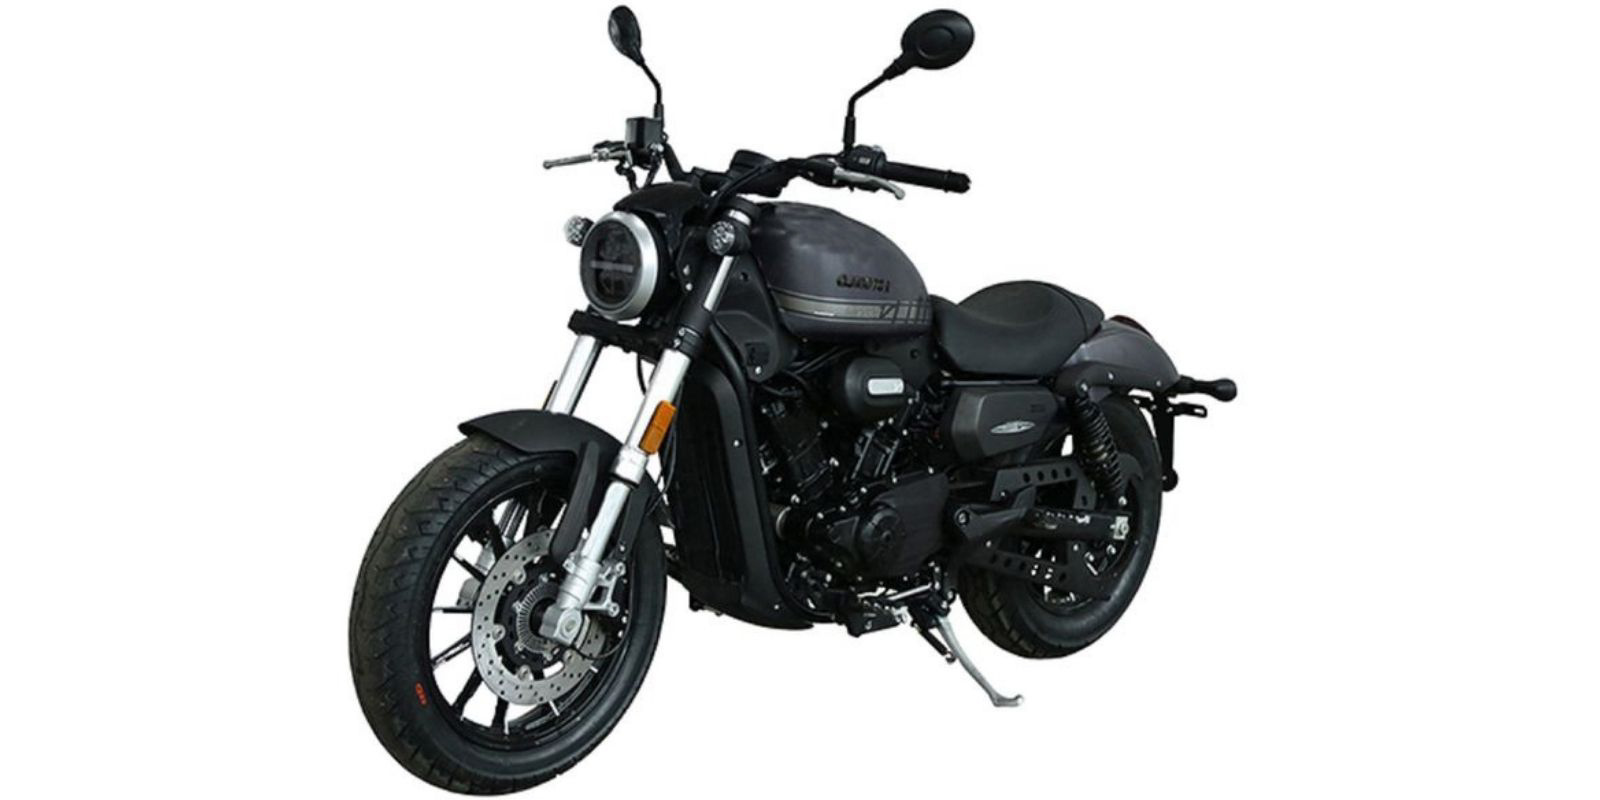 Harley Davidson Bike Images And Price In India Promotion Off56